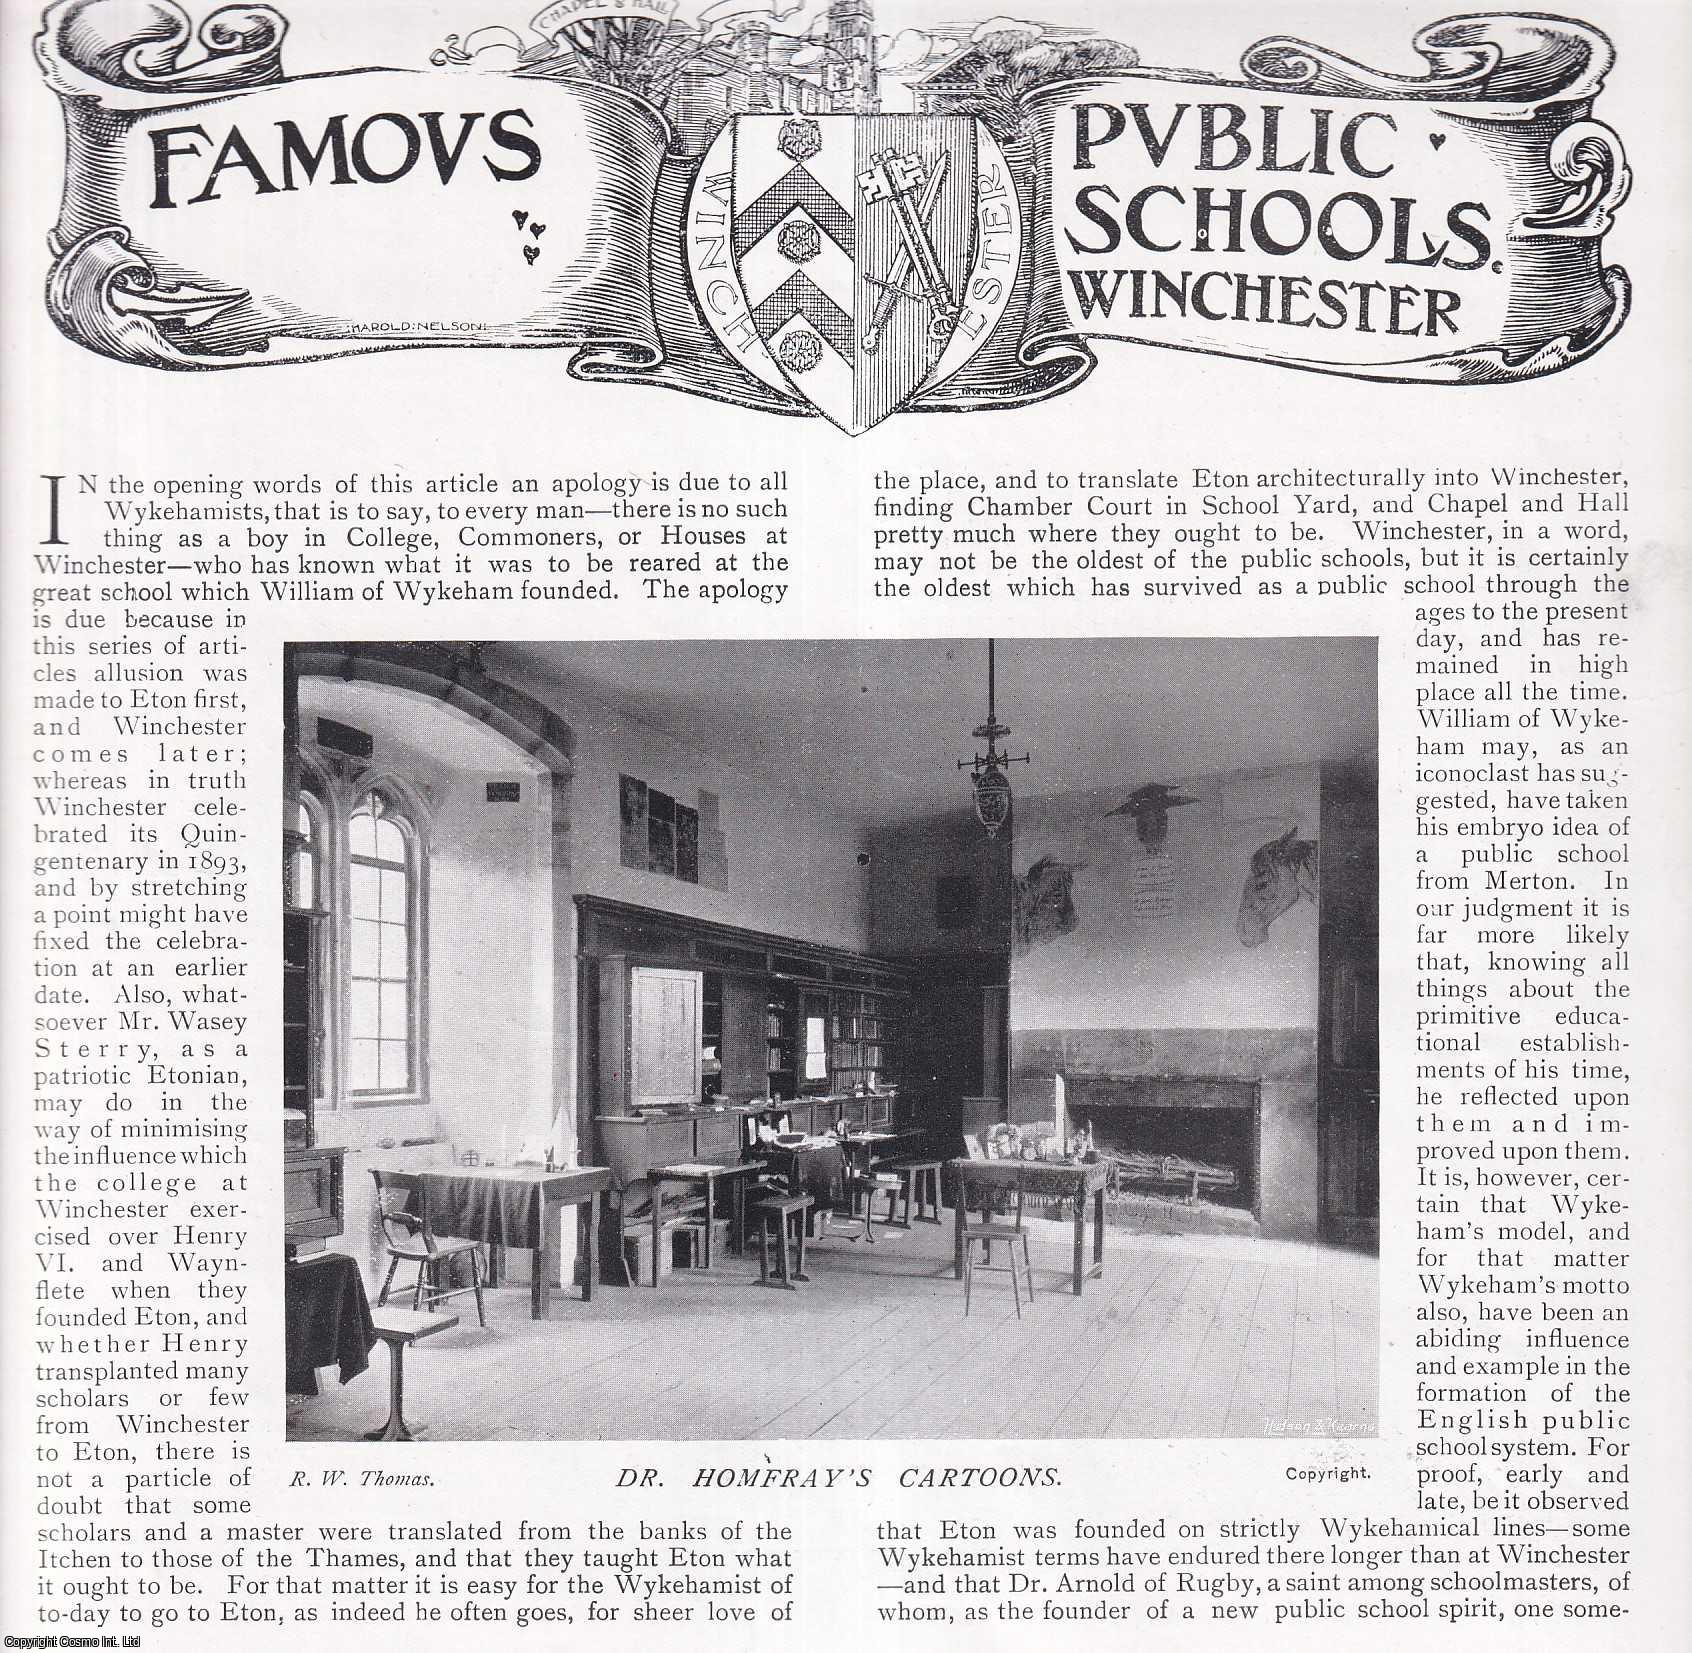 COUNTRY LIFE - Winchester: Famous Public School. Several pictures and accompanying text, removed from an original issue of Country Life Magazine, 1898.